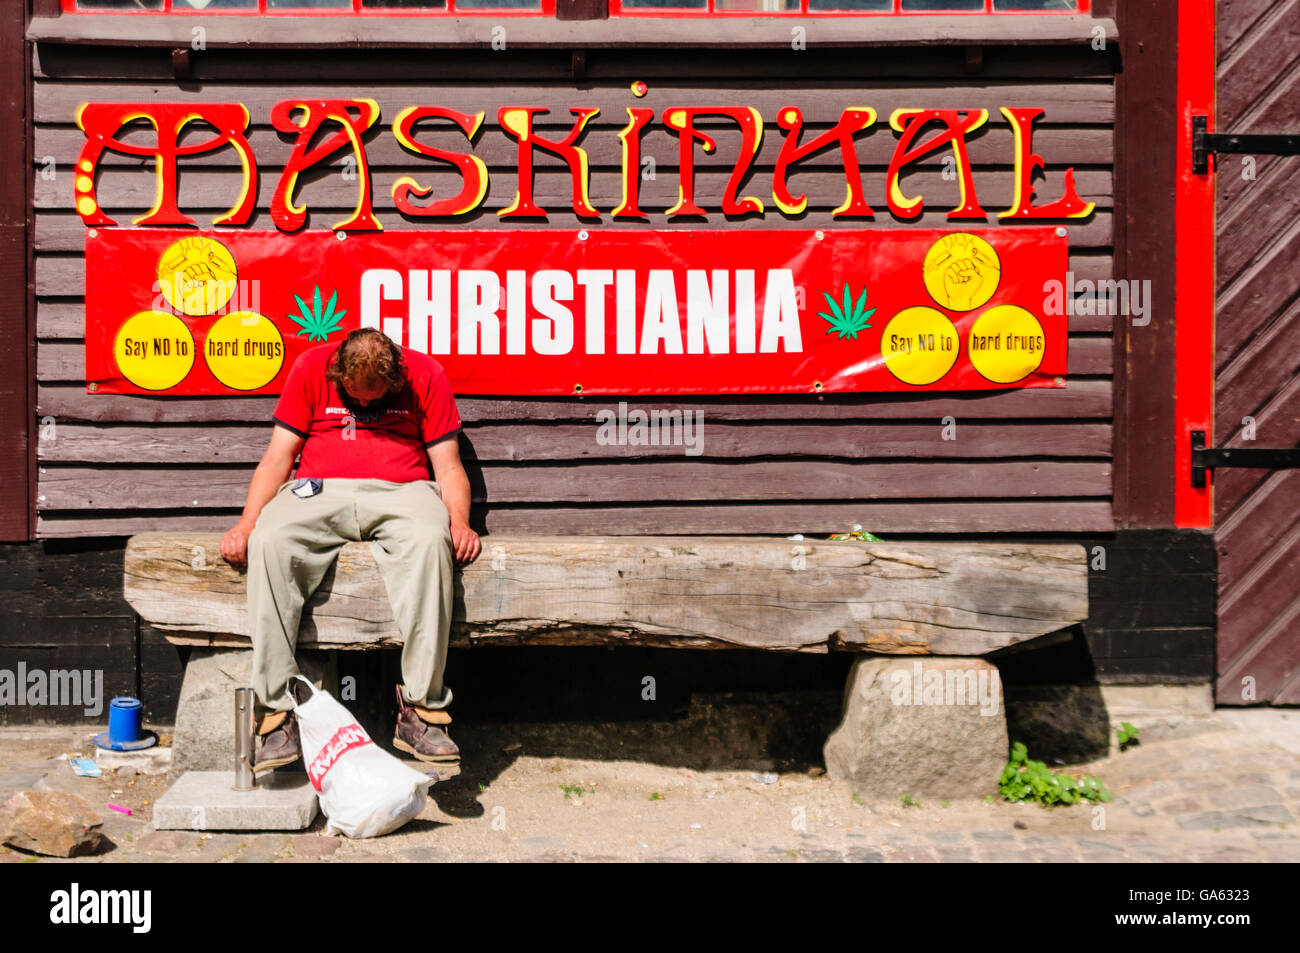 A man sits sleeping in front of a sign saying 'Say NO to hard drugs' in Freetown Christiana, Copenhagen Stock Photo